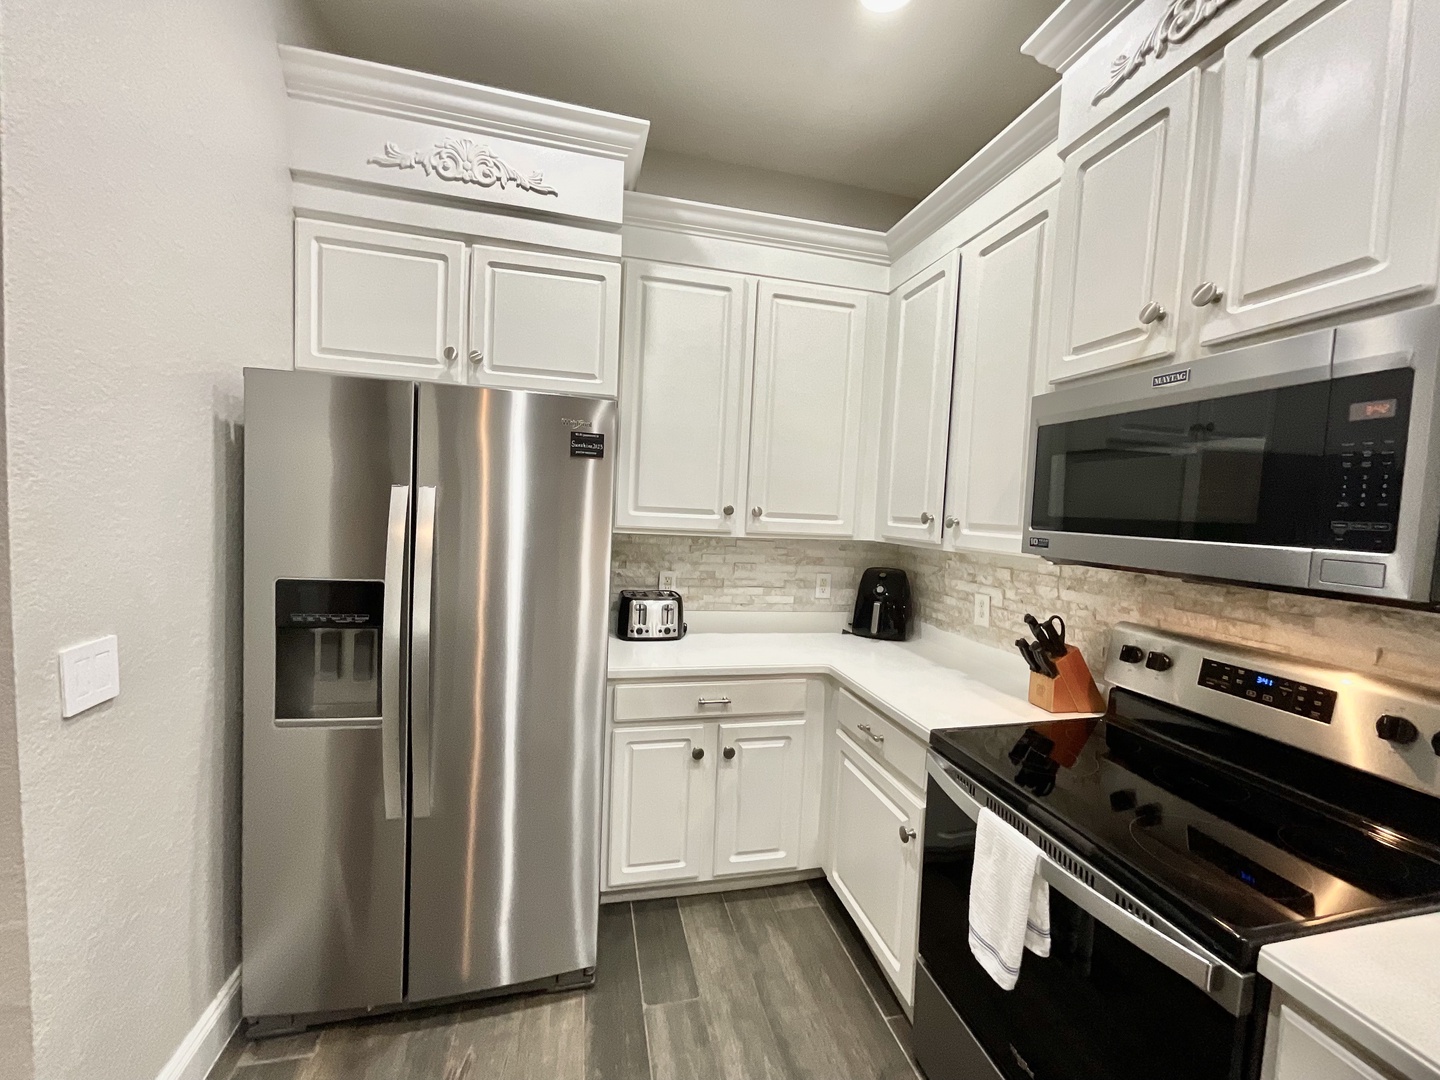 The airy kitchen provides ample space and all the comforts of home